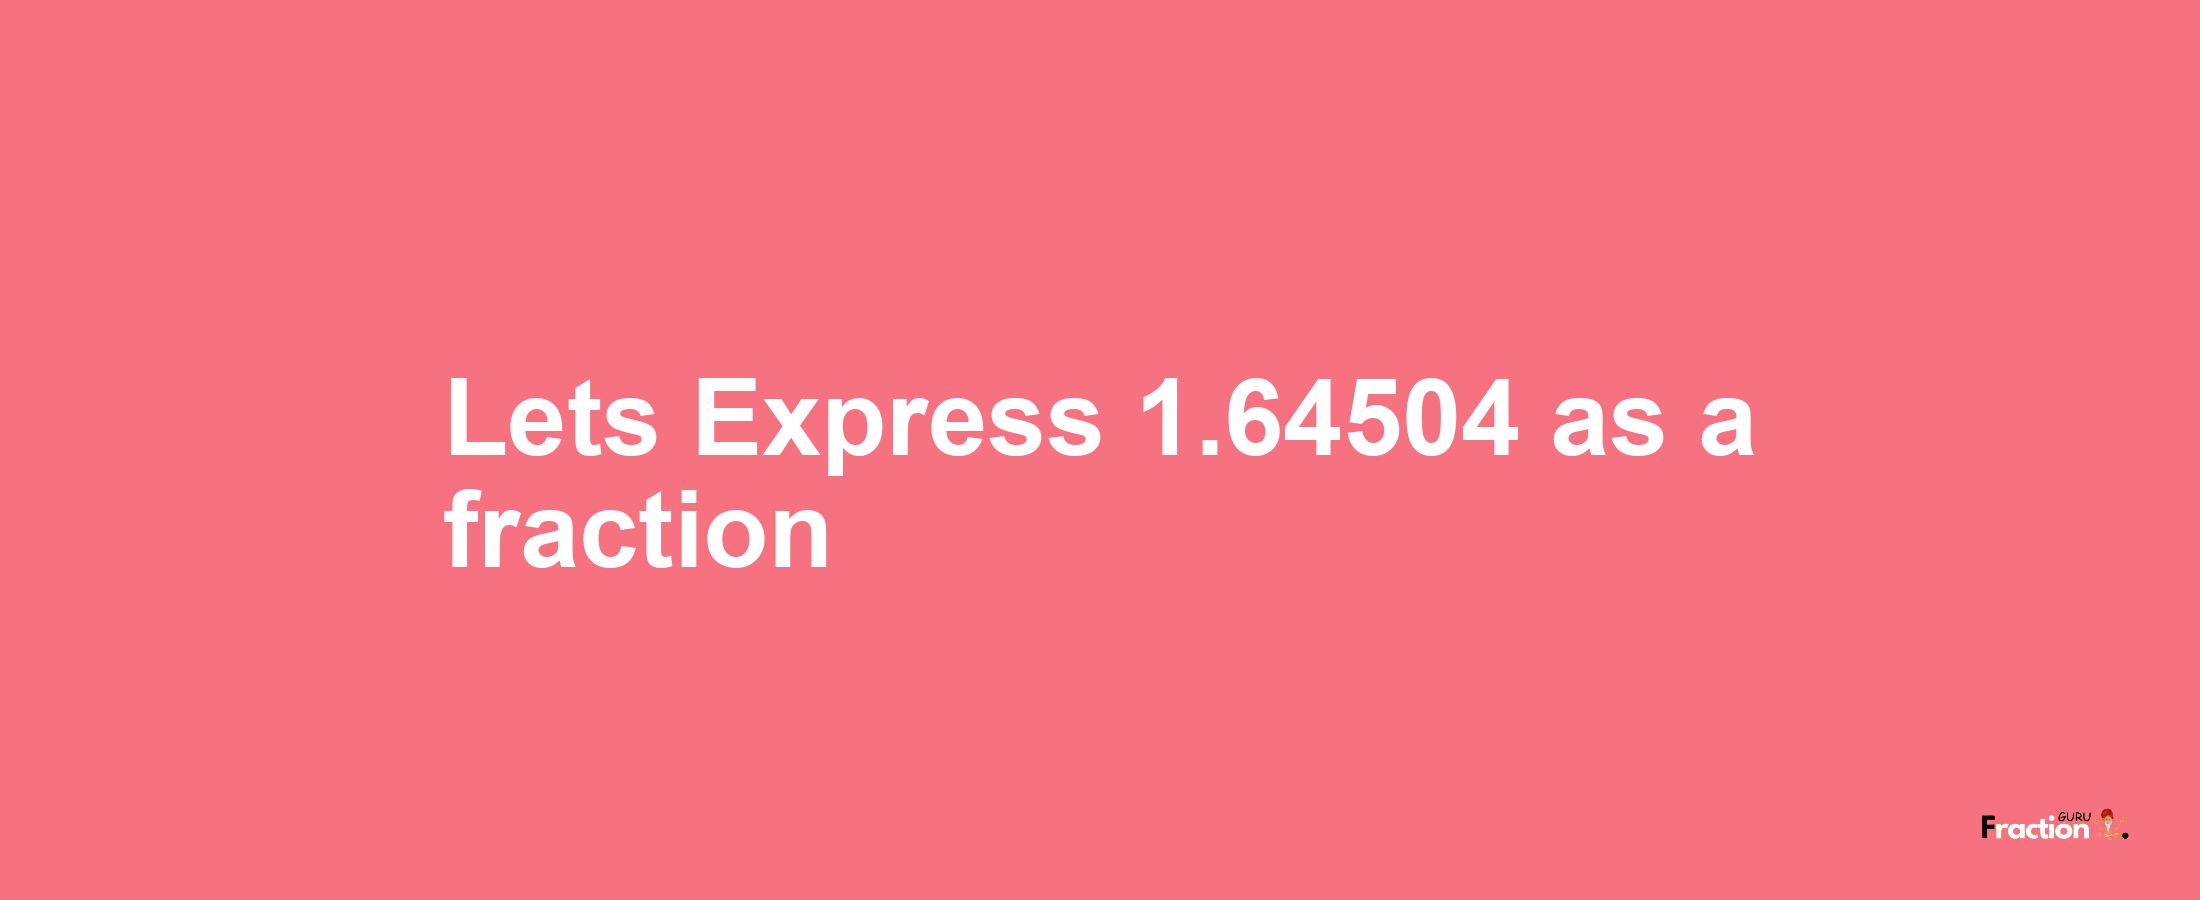 Lets Express 1.64504 as afraction